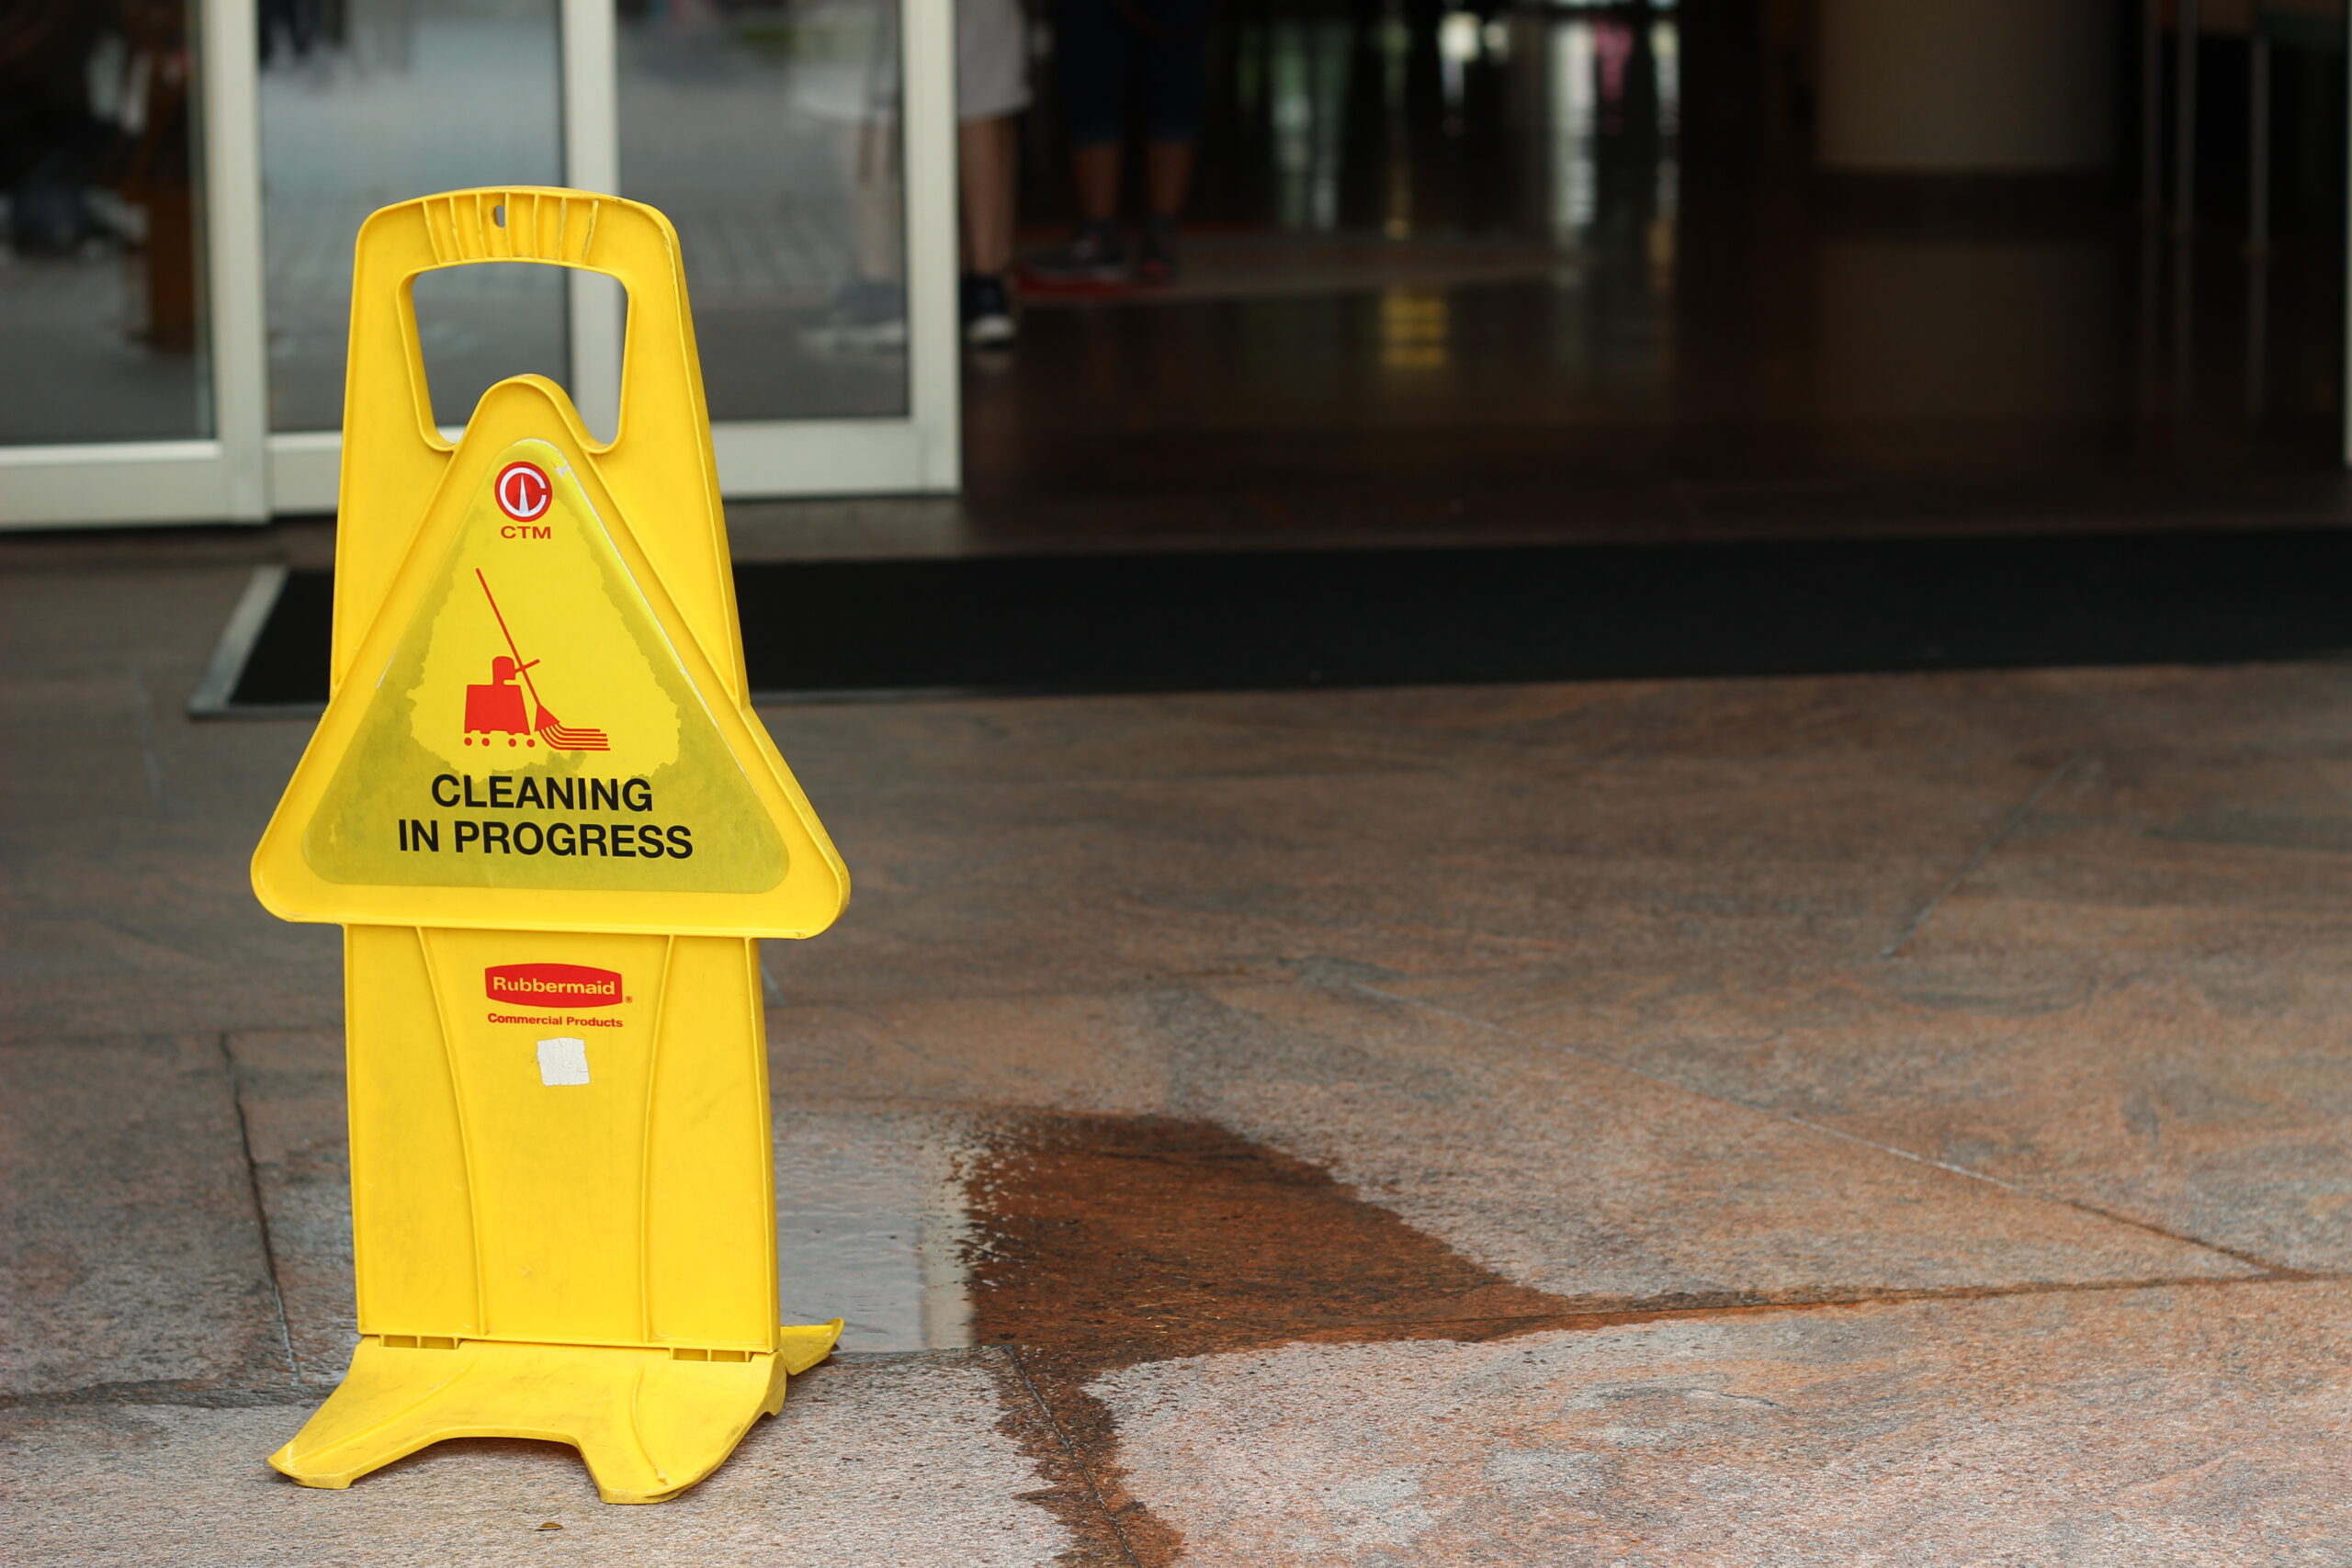 A wet floor sign outside of a building entrance.